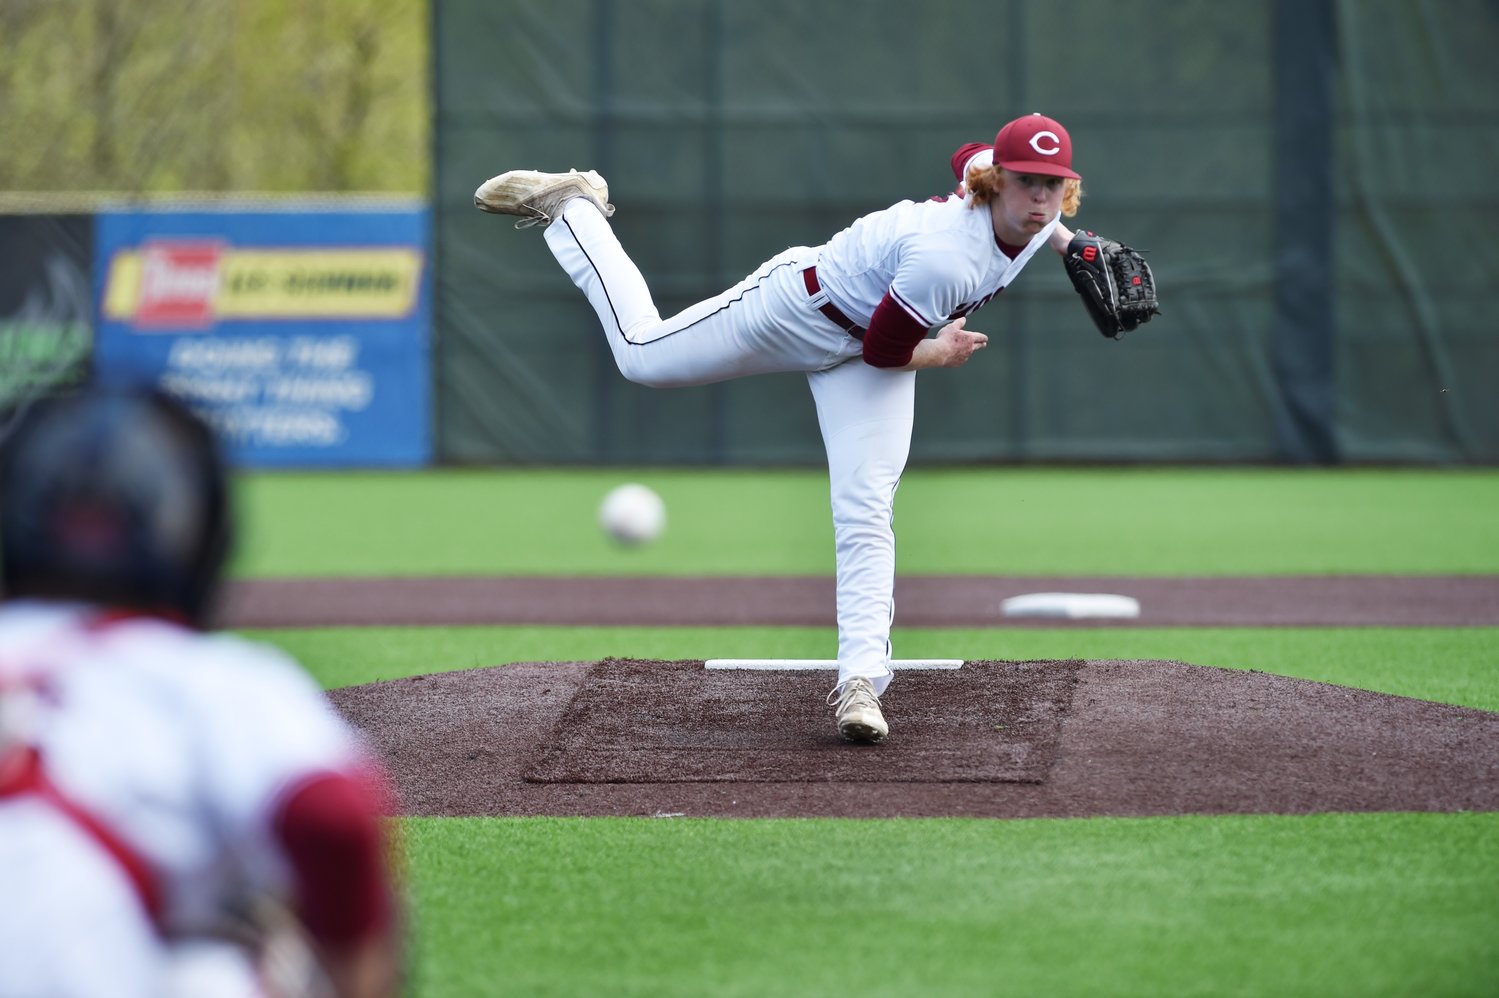 W.F. West pitcher Logan Moore throws a fastball in the third inning of a loser-out, winner-to-regional 2A District 4 matchup with Mark Morris in Ridgefield May 14.